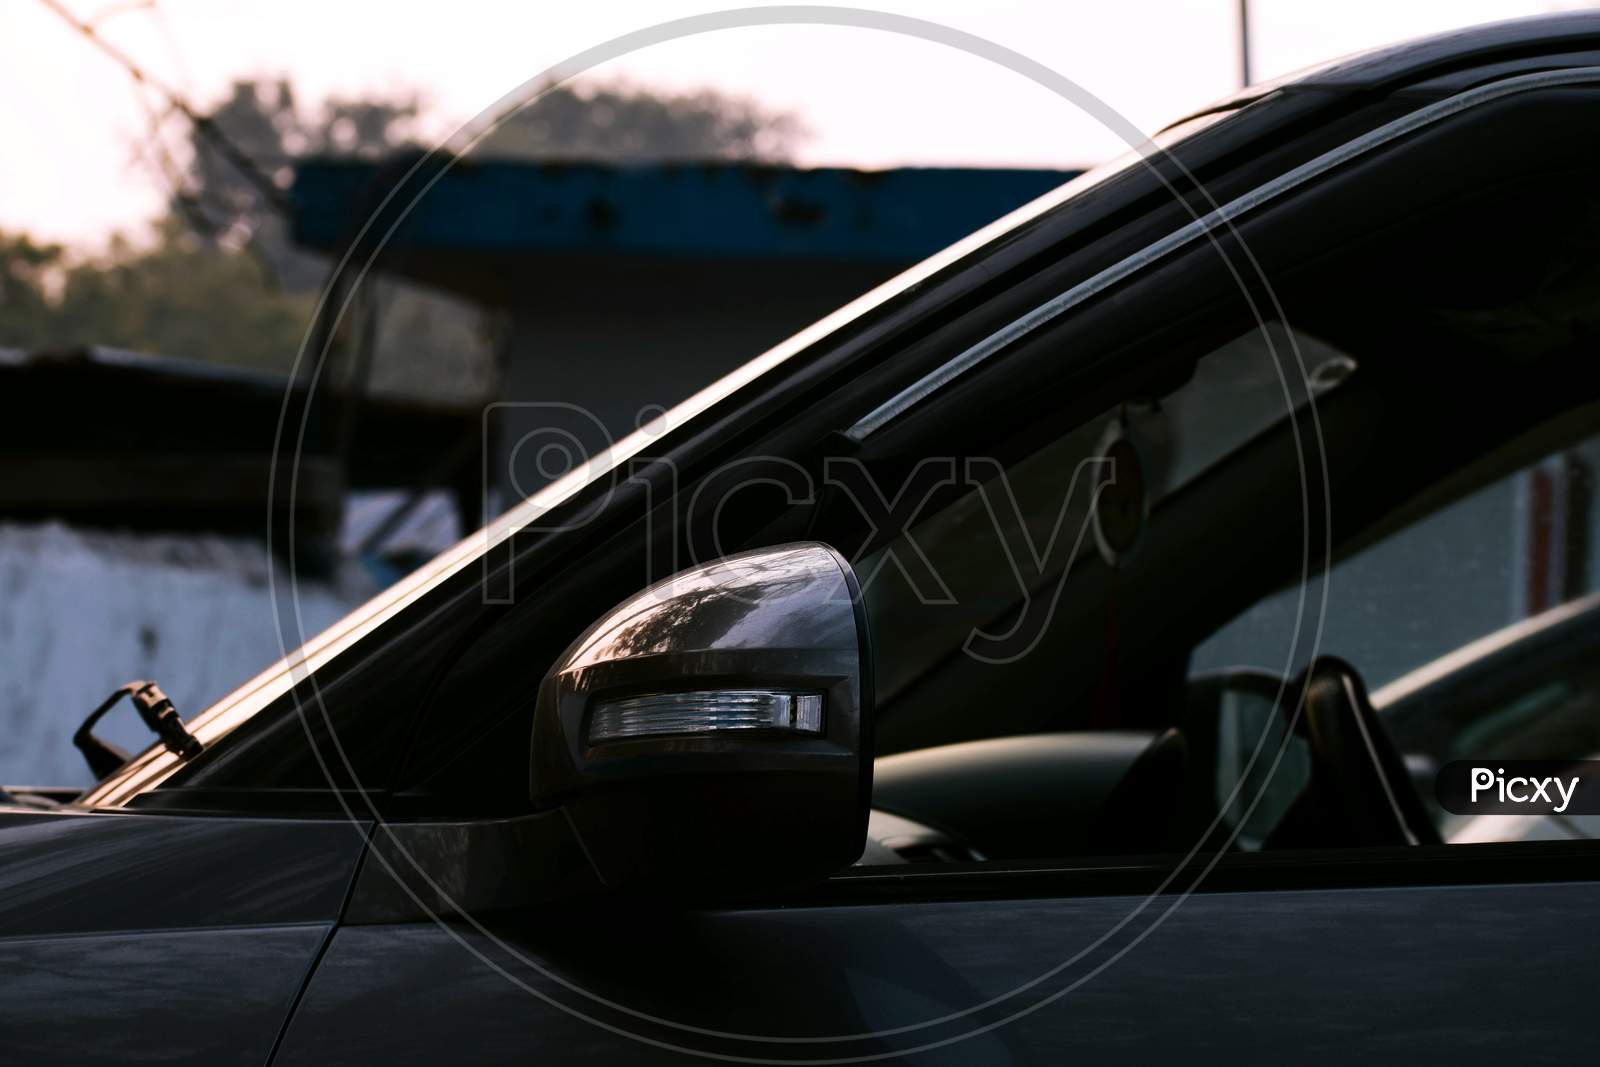 Beautiful Picture Of Mirror Of The Car.Interior Car, Selective Focus On Subject